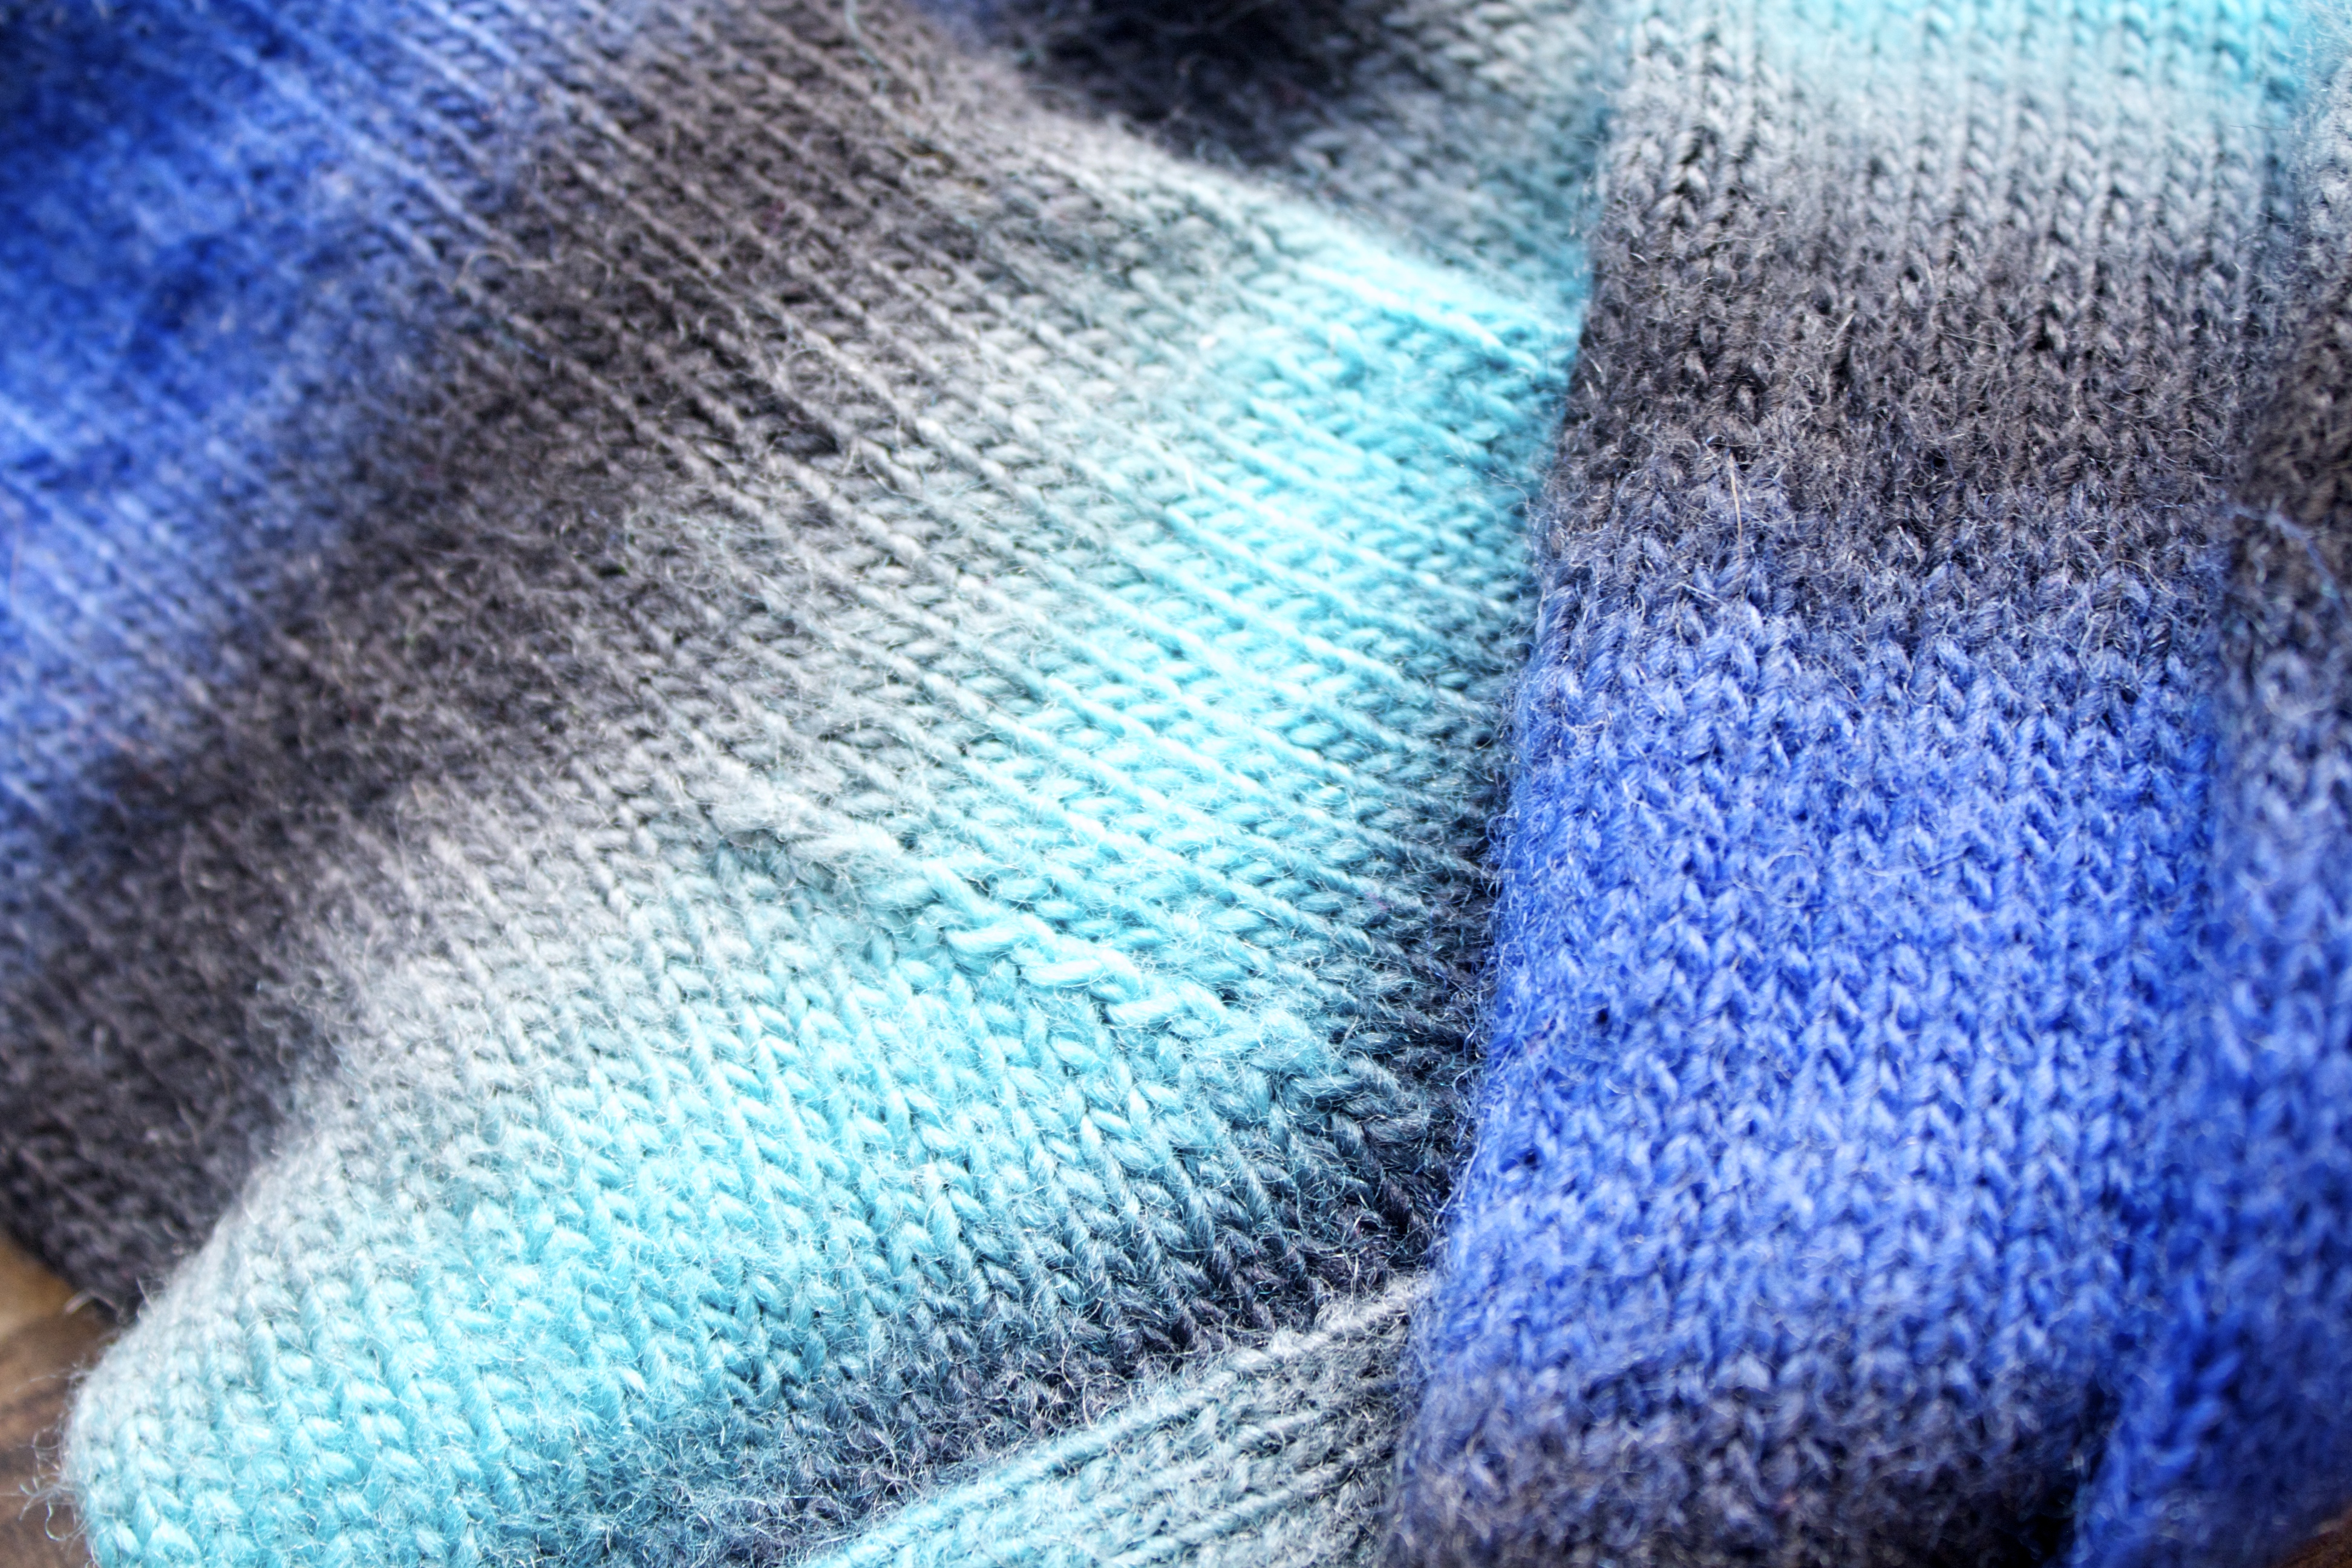 The colours are wonderful.  The greys make the aqua and blue really pop!